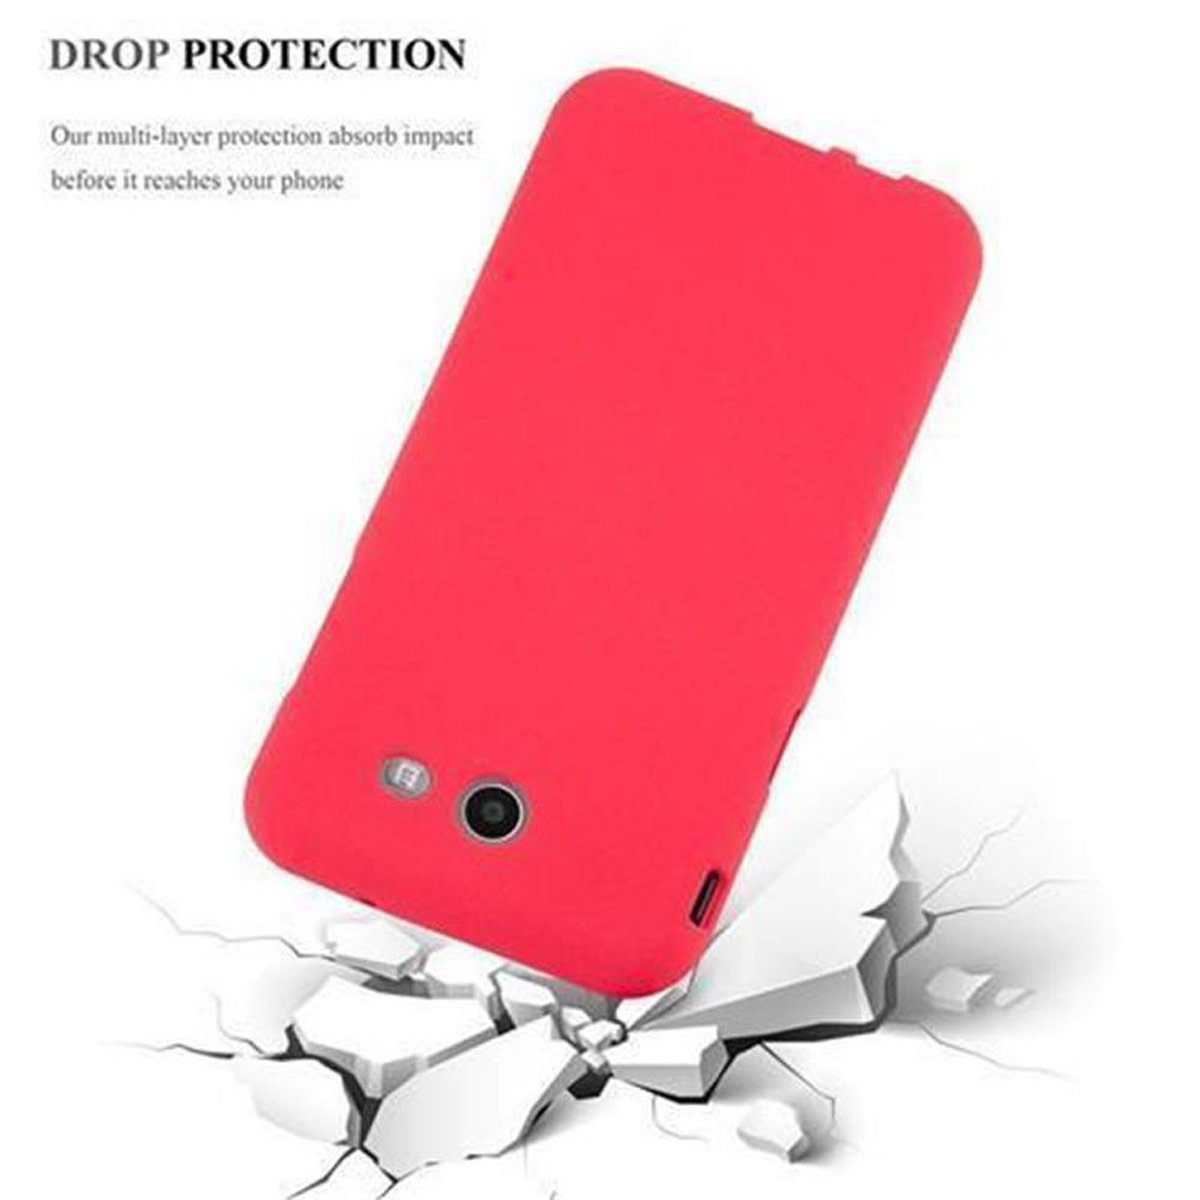 Samsung, ROT Version, Galaxy Frosted CADORABO TPU Schutzhülle, J7 2017 FROST Backcover, US